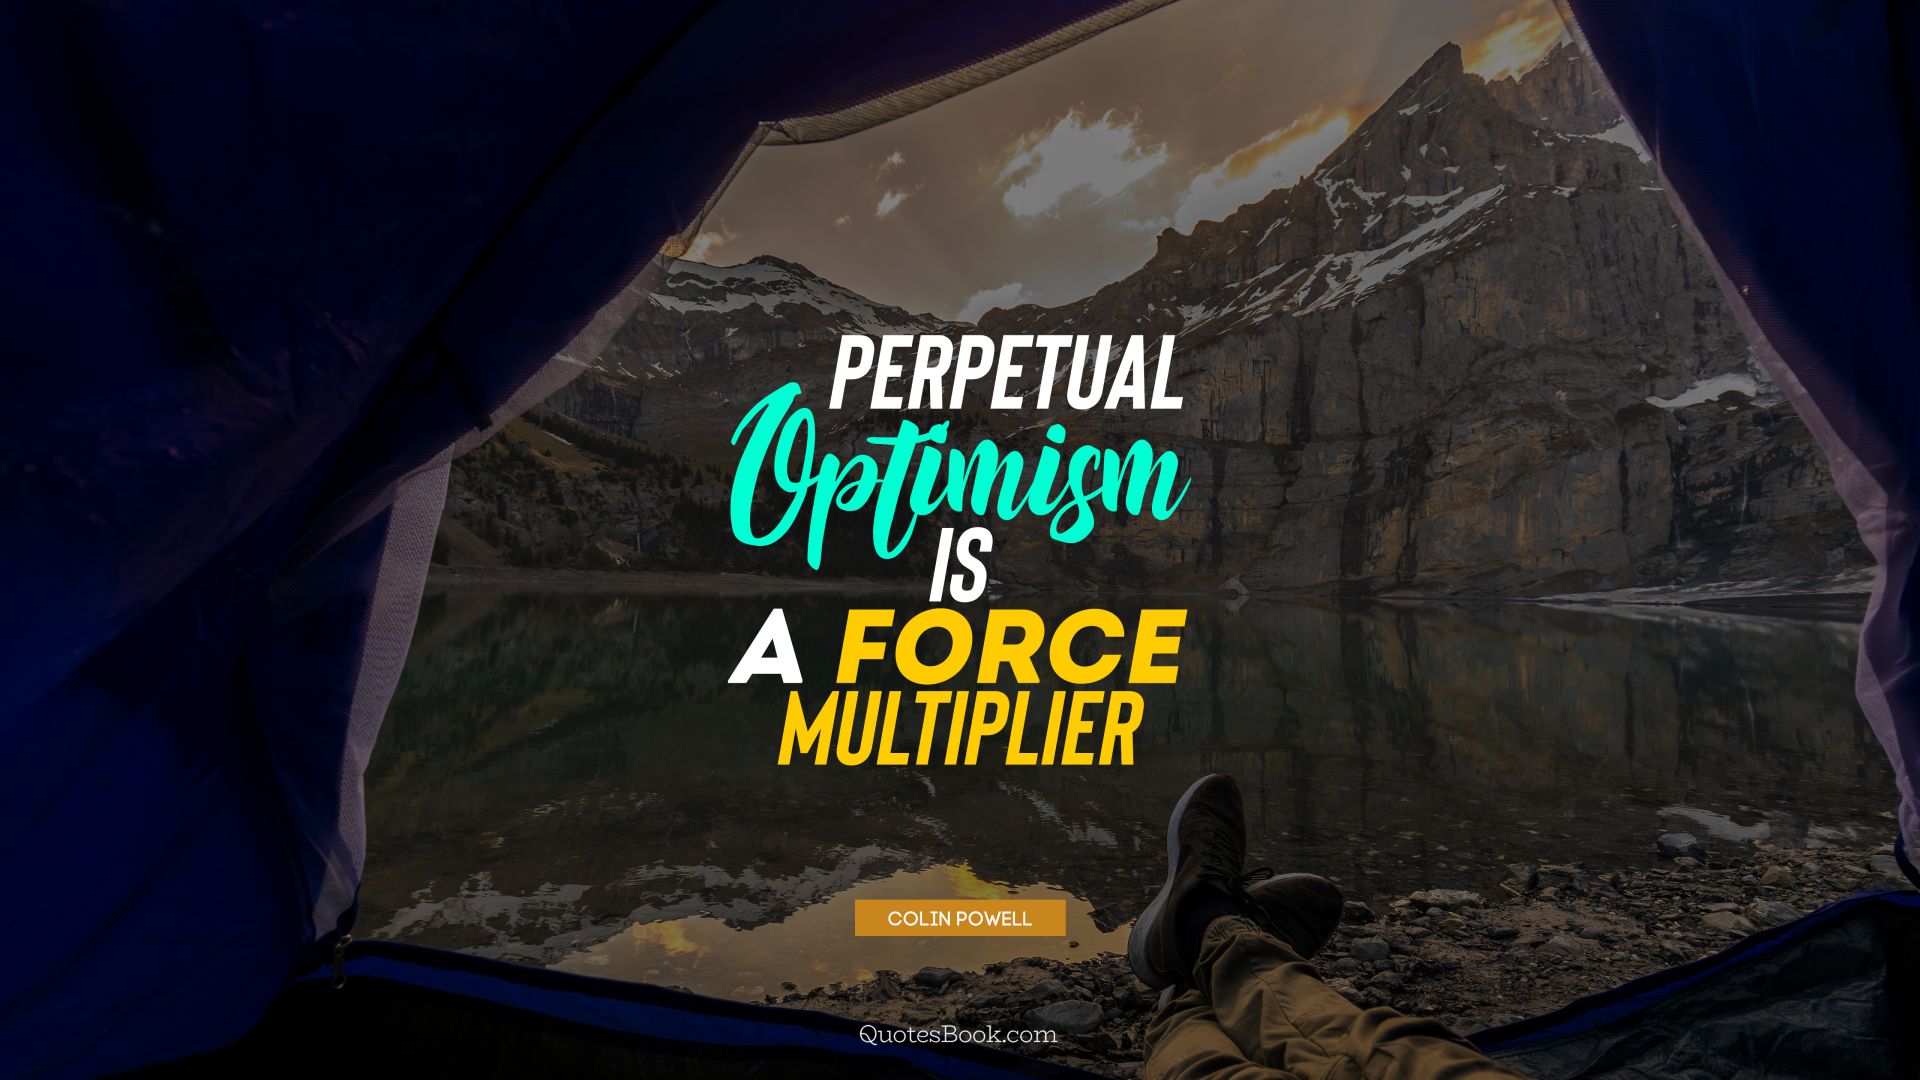 Perpetual optimism is a force multiplier. - Quote by Colin Powell